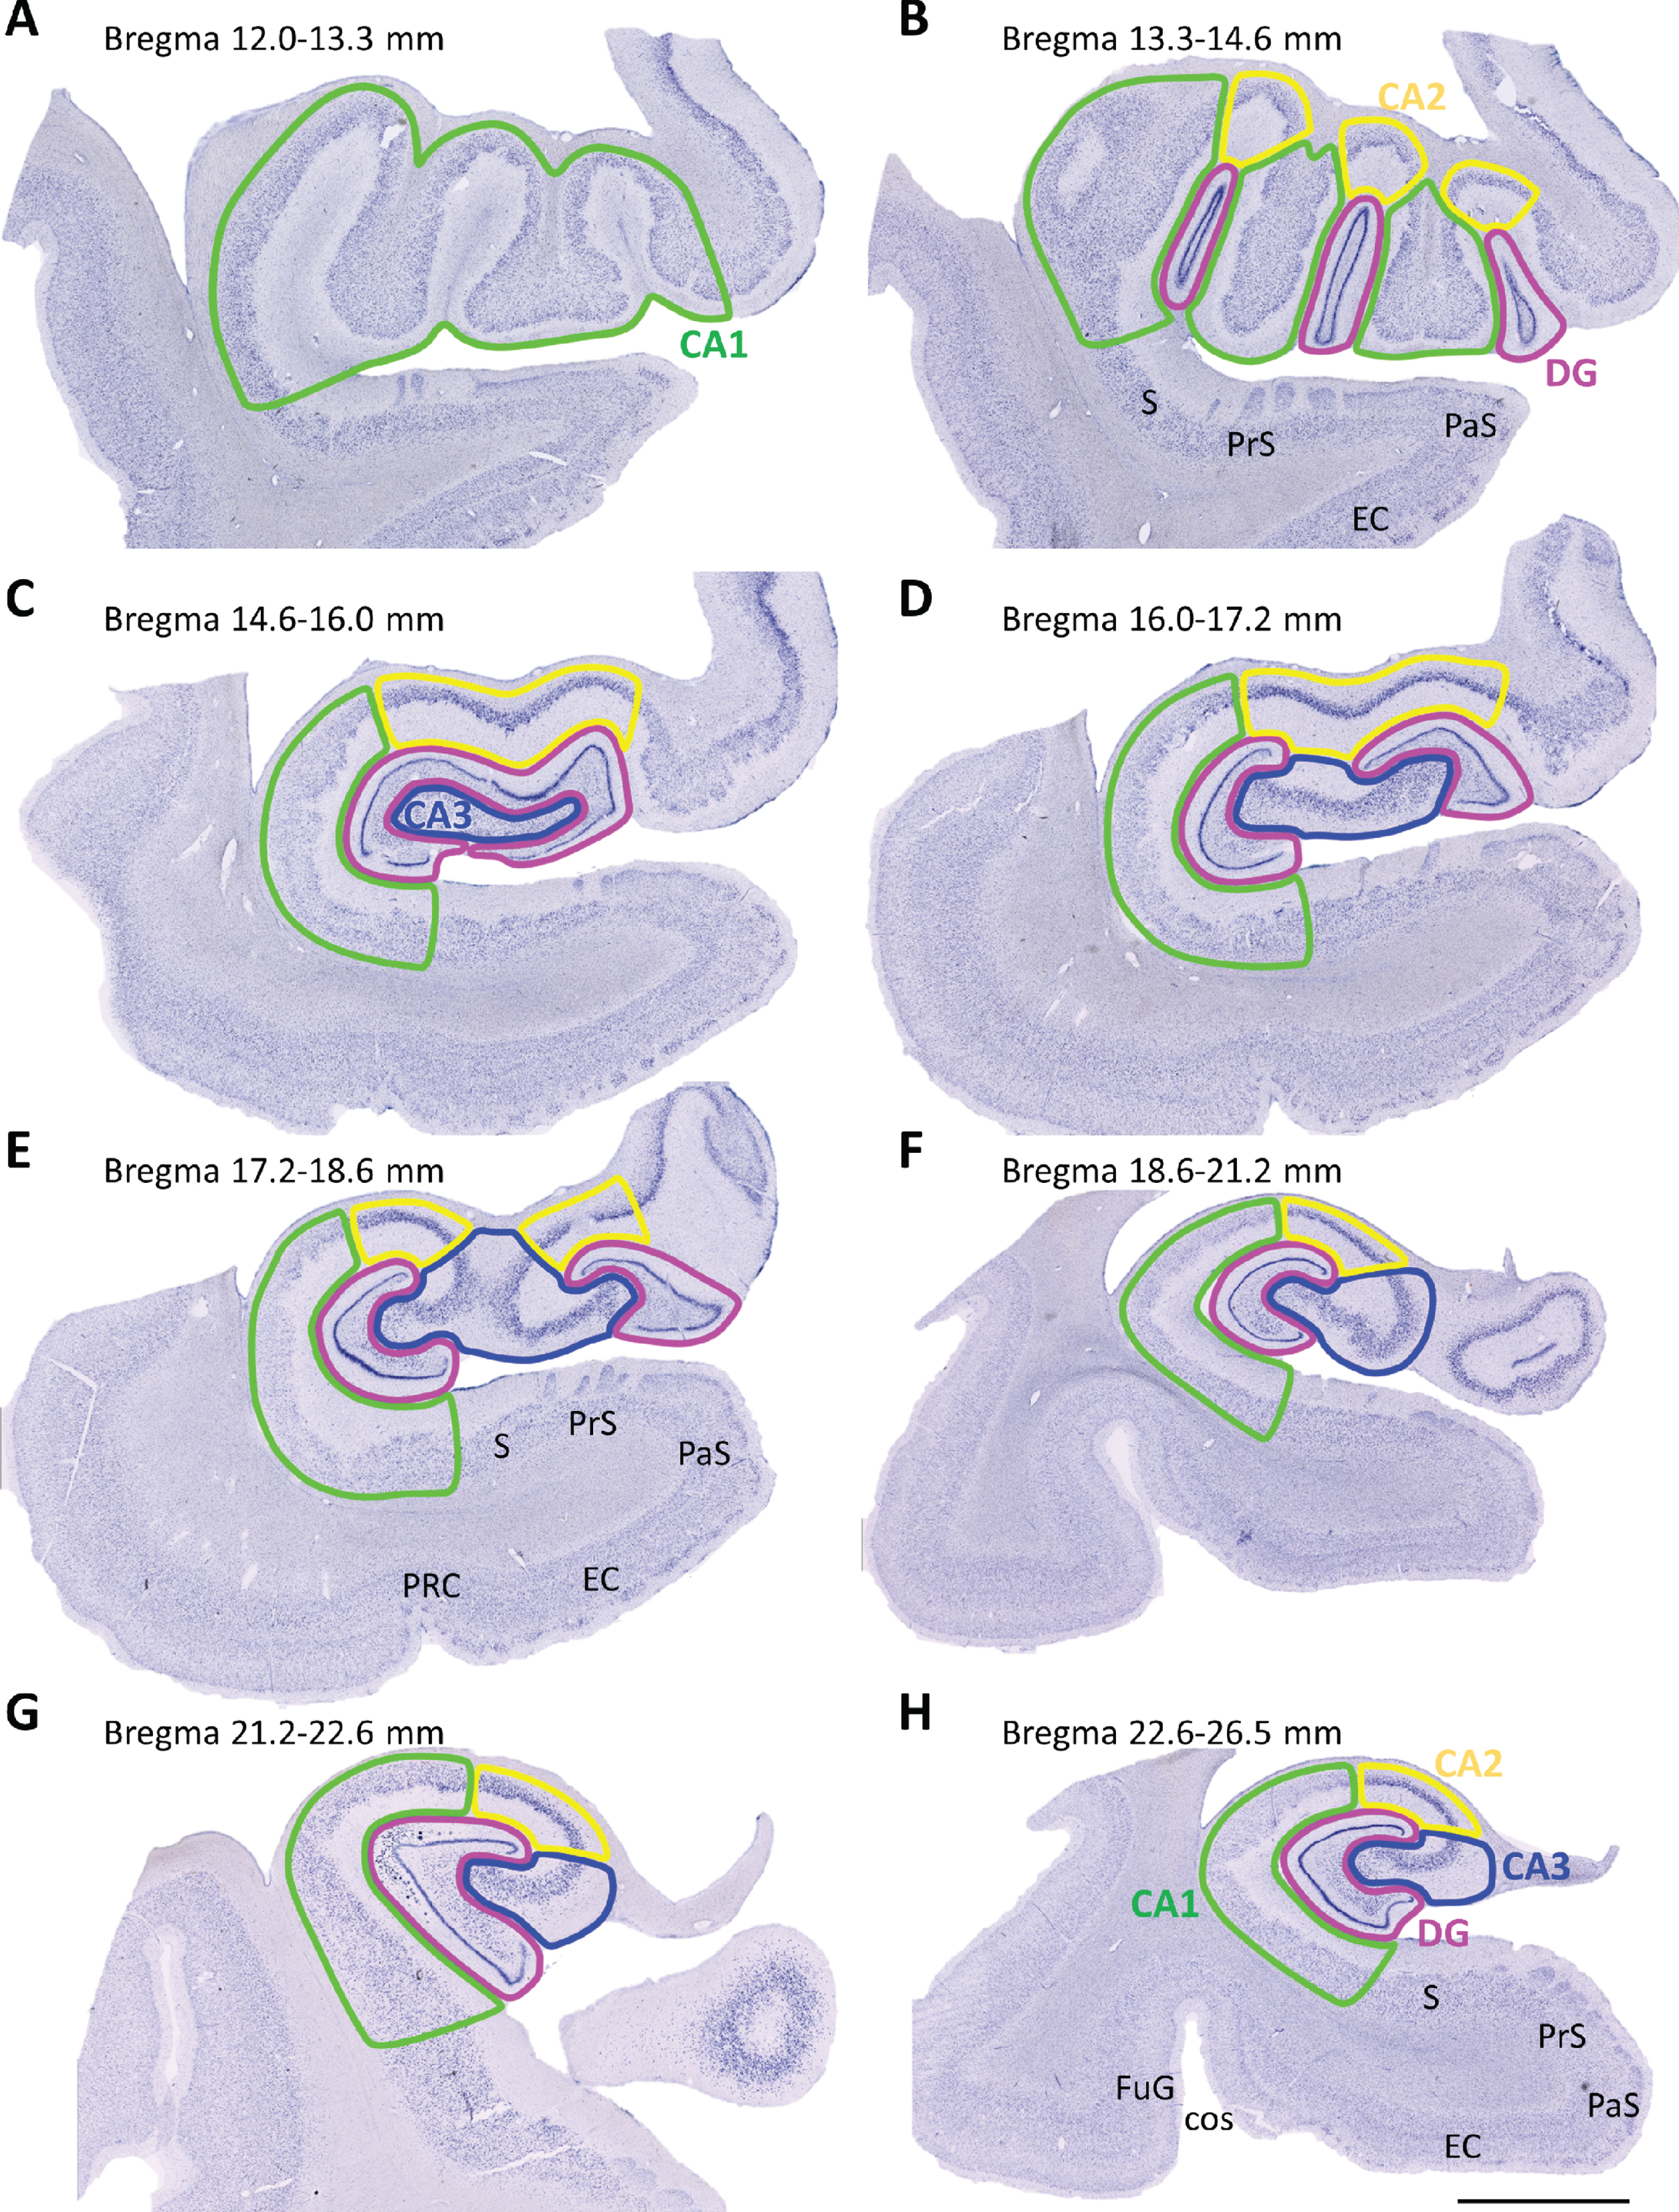 Mosaic reconstruction of coronal Nissl-stained sections of the human hippocampus. The numbers above show the level of bregma (mm). (A-B) Rostral (12.0–16.0 mm), (C-E) intermediate (16.0–21.2 mm) and (F-H) caudal (21.2–26.5 mm) hippocampus sections were examined. Dentate gyrus (DG), cornu ammonis (CA), subiculum (S), presubiculum (PrS), parasubiculum (PaS), entorhinal cortex (EC), perirhinal cortex (PRC), fusiform gyrus (FuG), collateral sulcus (cos). Scale bar 5000μm.